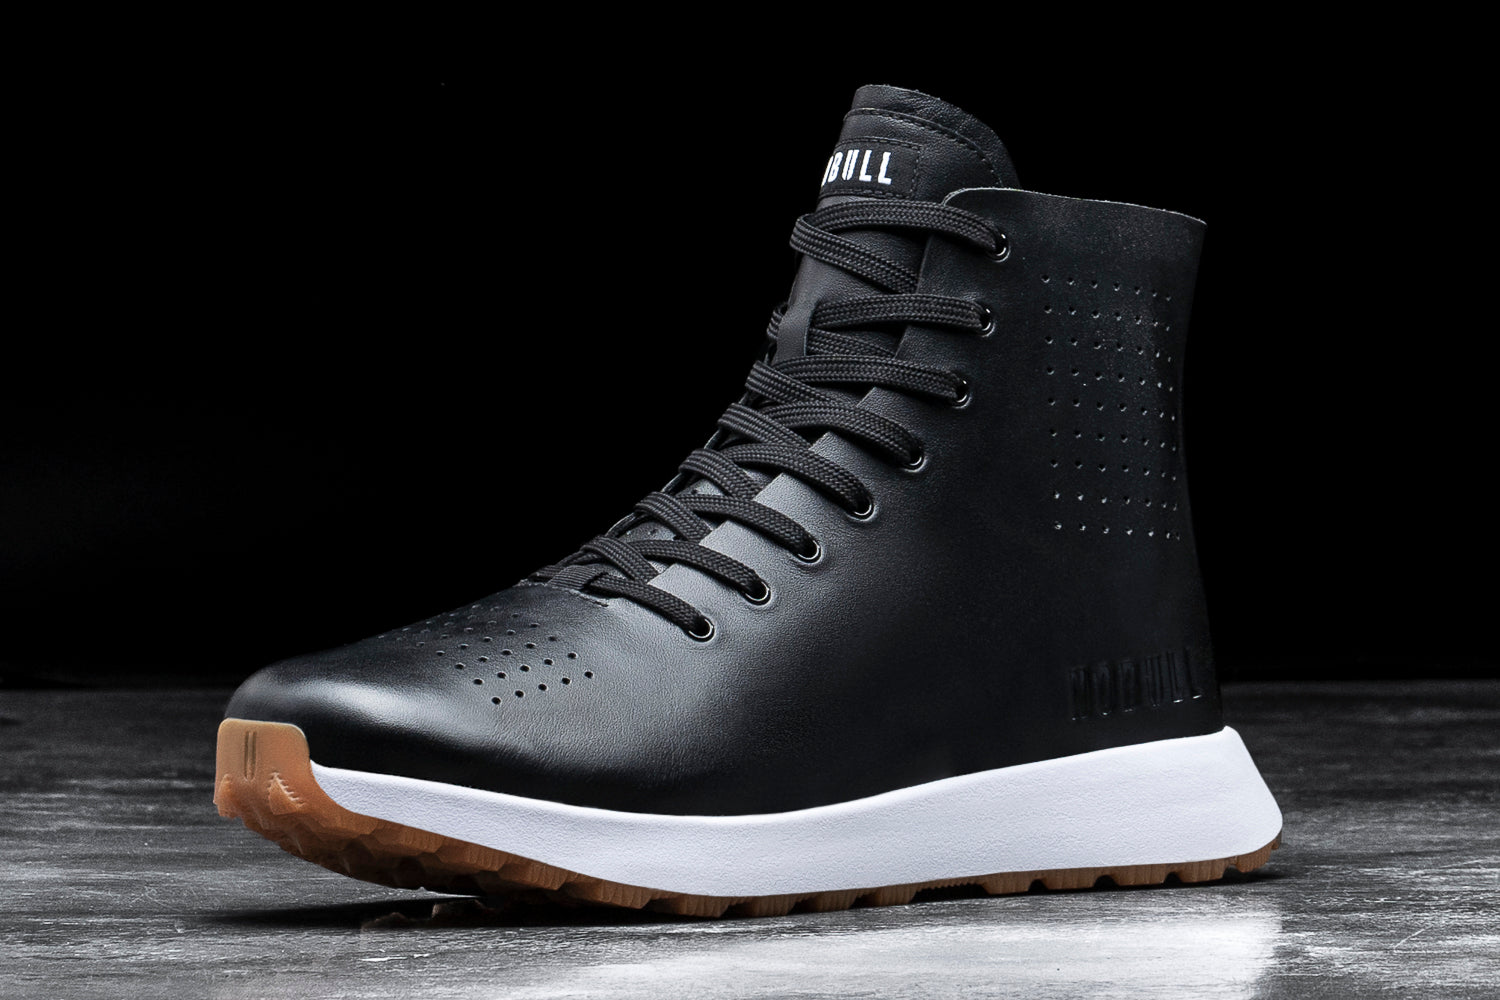 Men's Deconstructed Leather High-Top